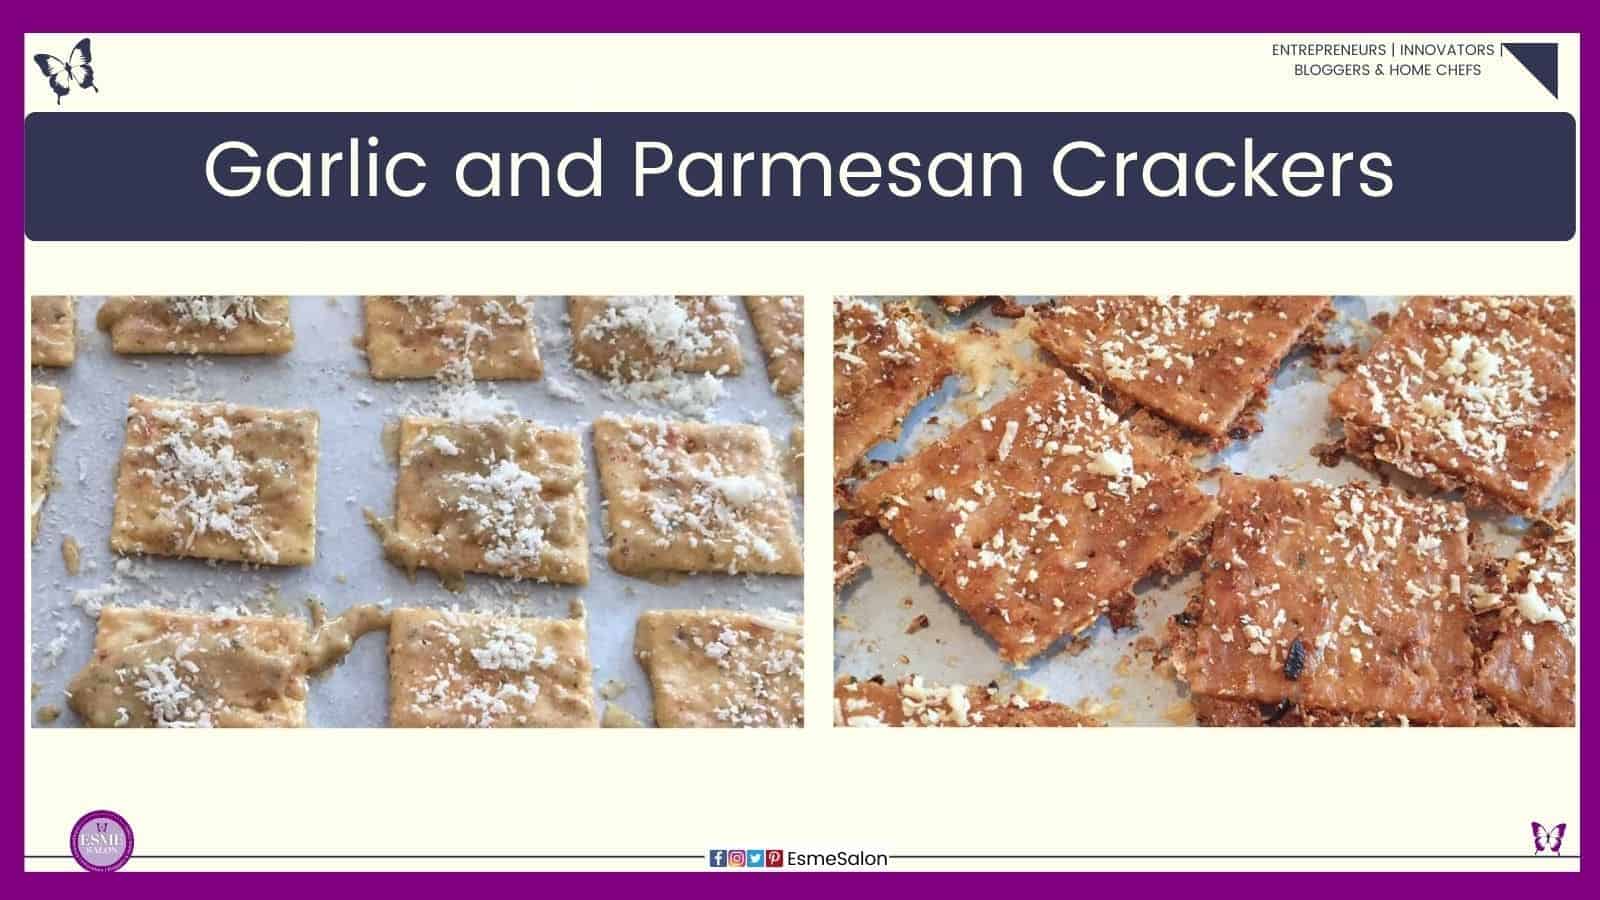 an image of baked and unbaked Garlic and Parmesan Crackers